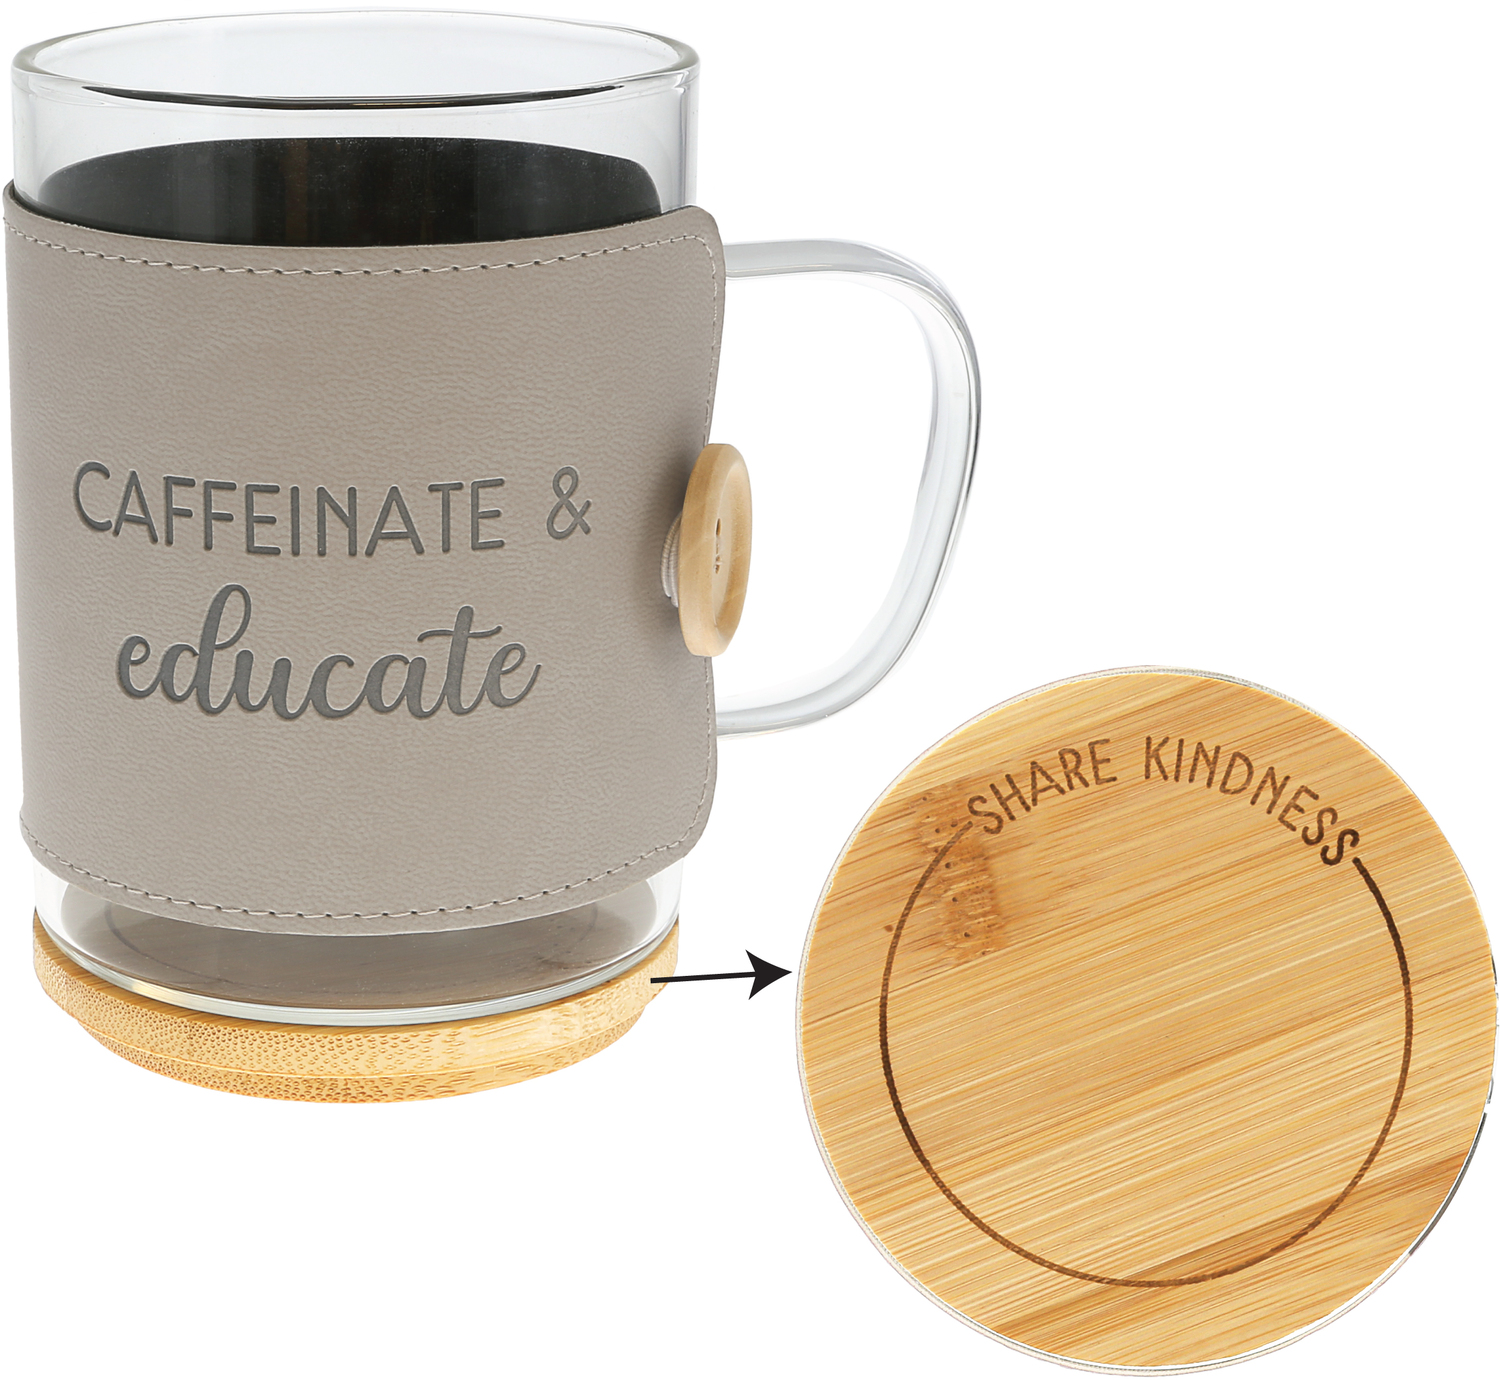 Educate by Wrapped in Kindness - Educate - 16 oz Wrapped Glass Mug with Coaster Lid